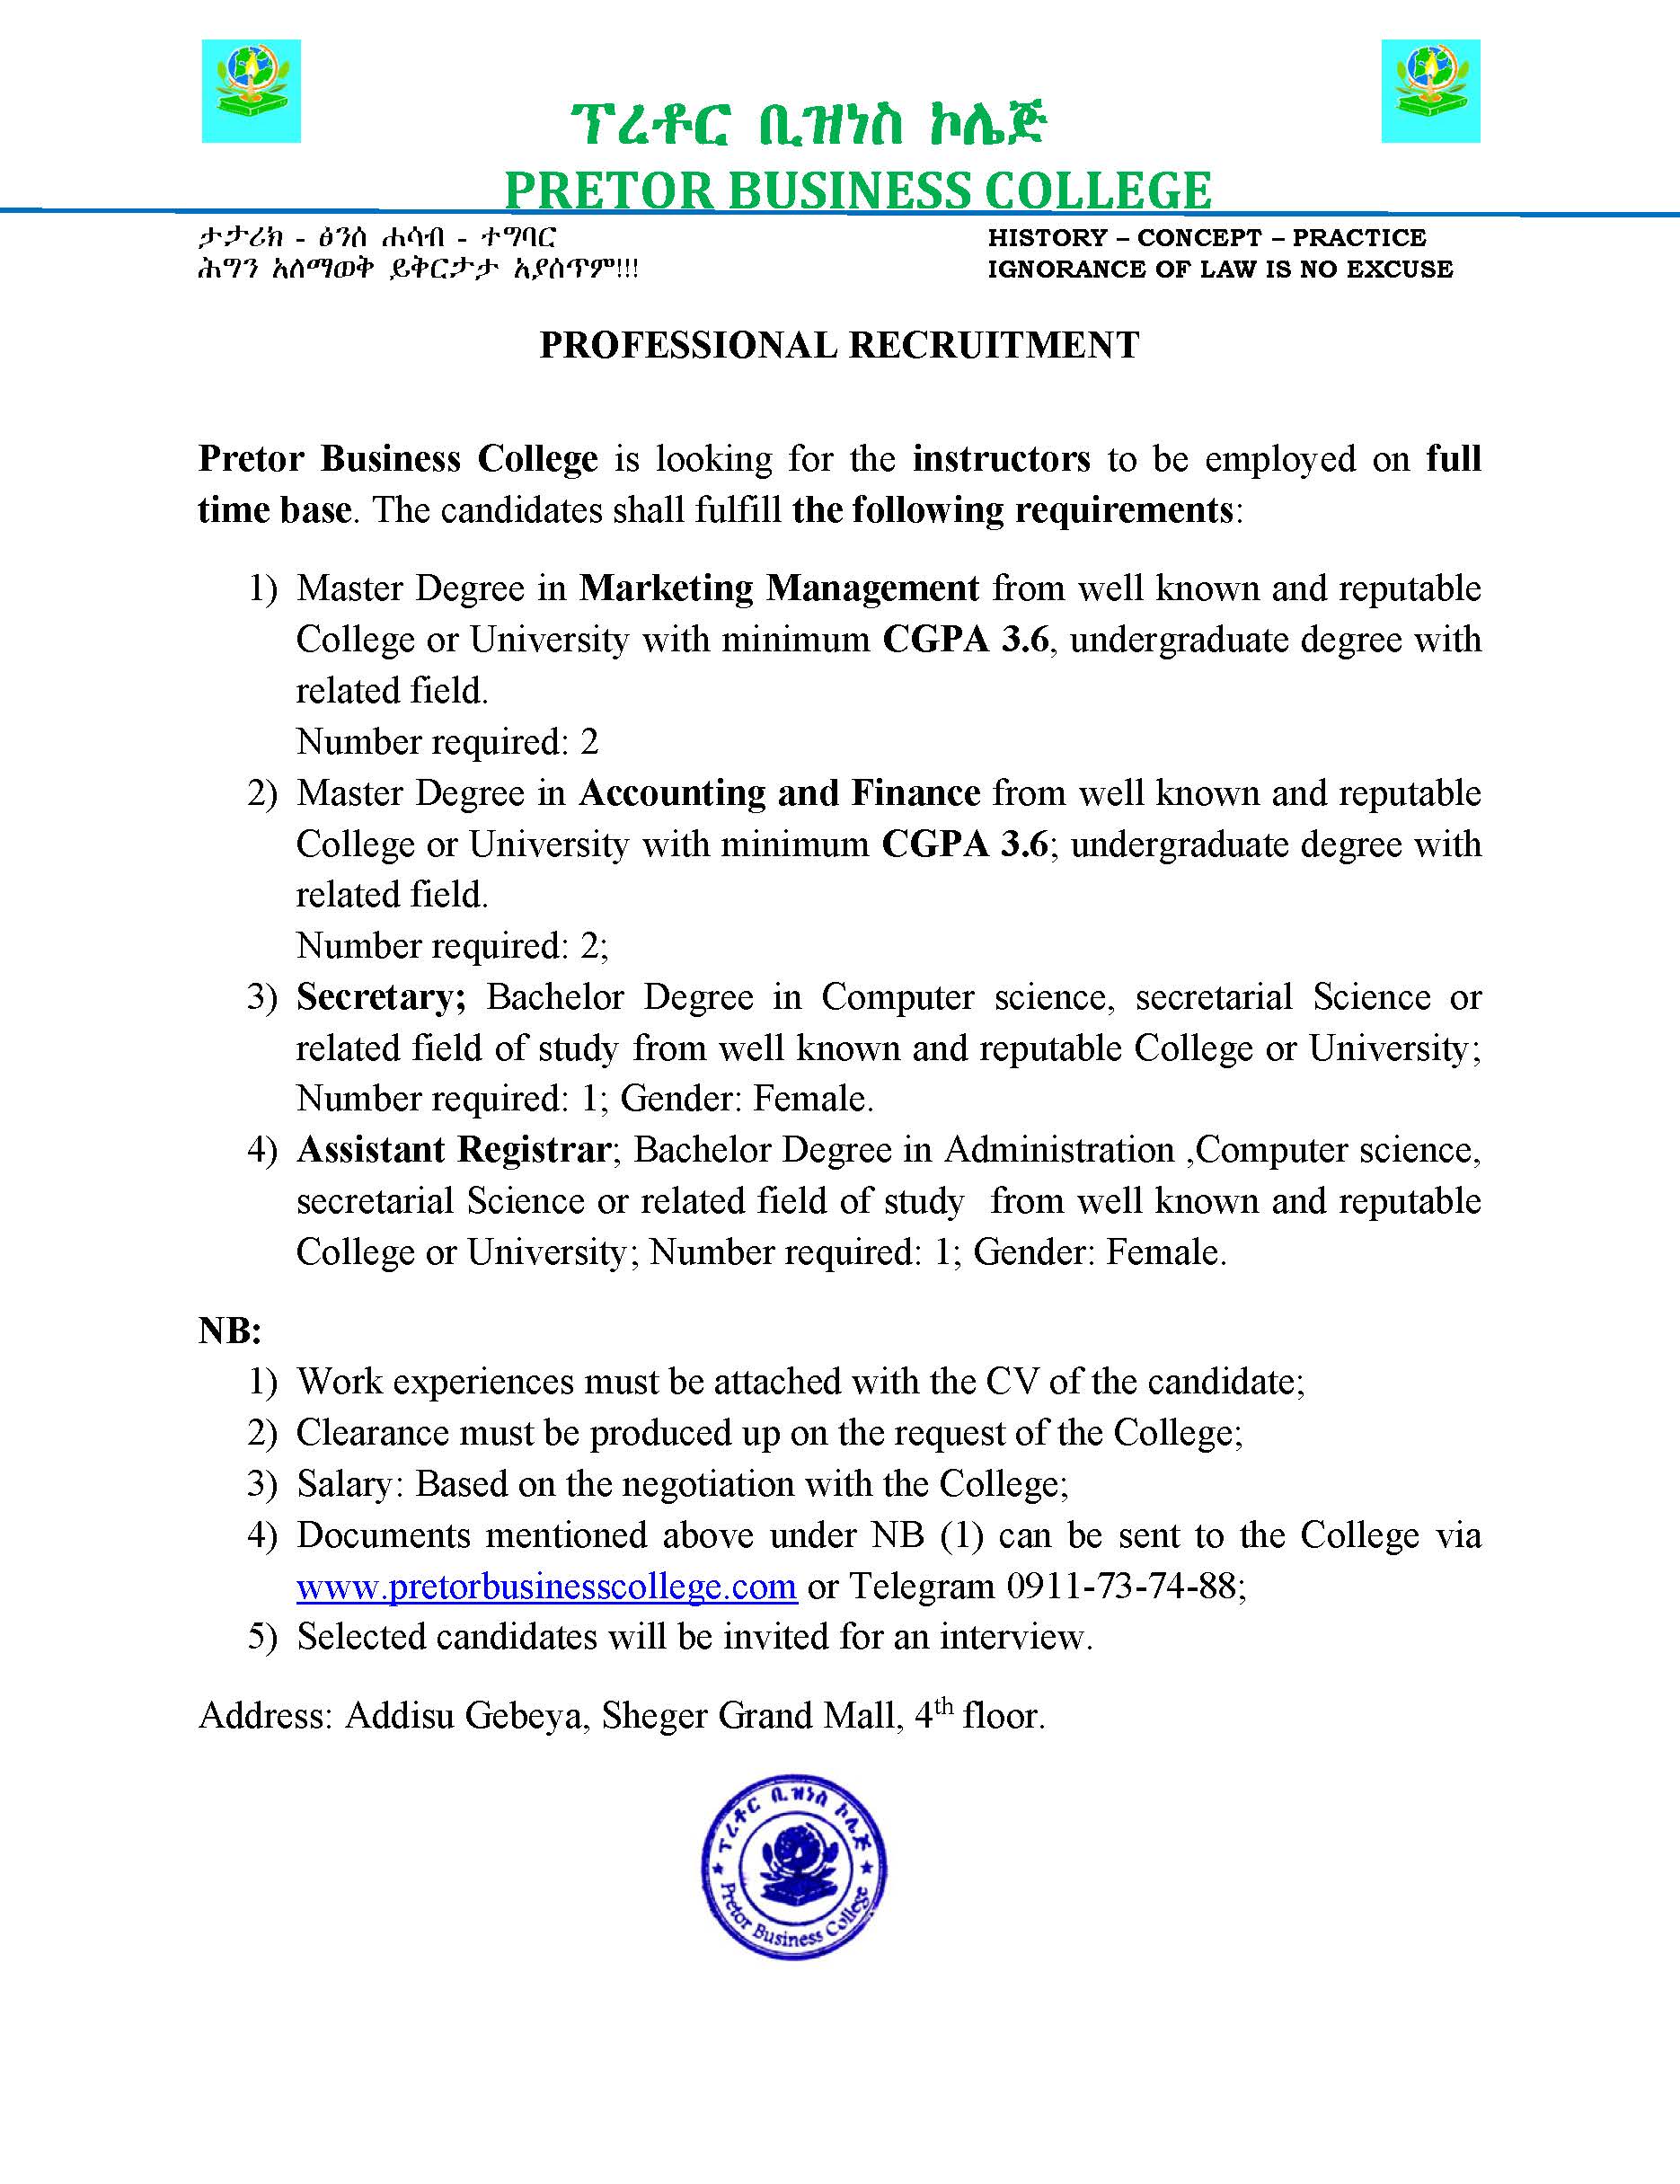 Vacancy announcement Page 1